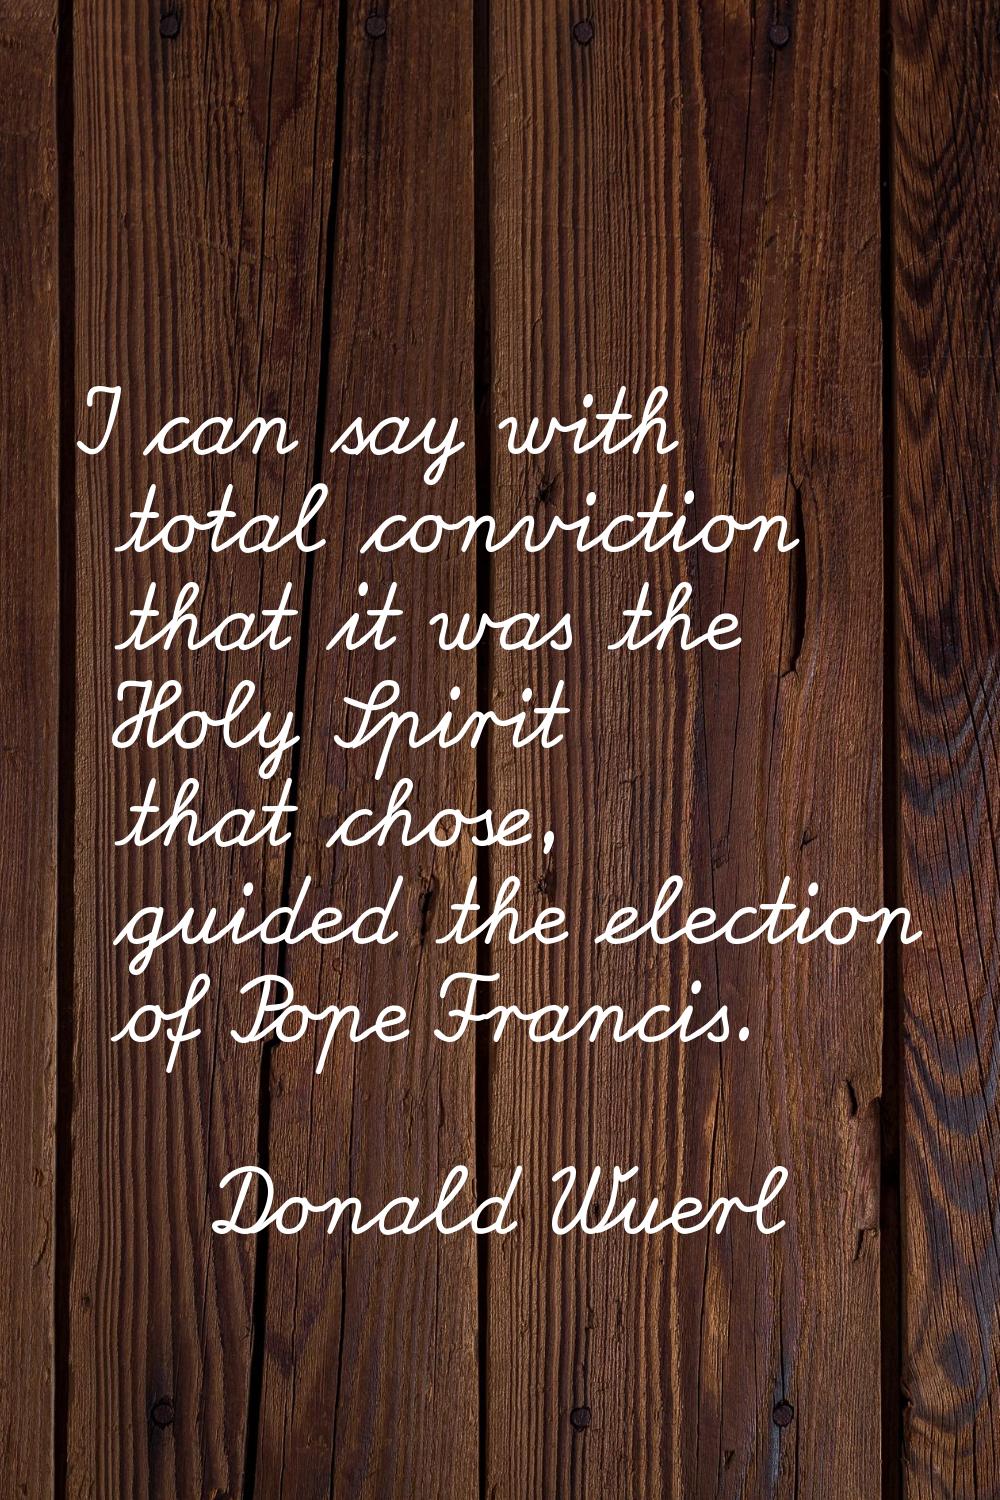 I can say with total conviction that it was the Holy Spirit that chose, guided the election of Pope